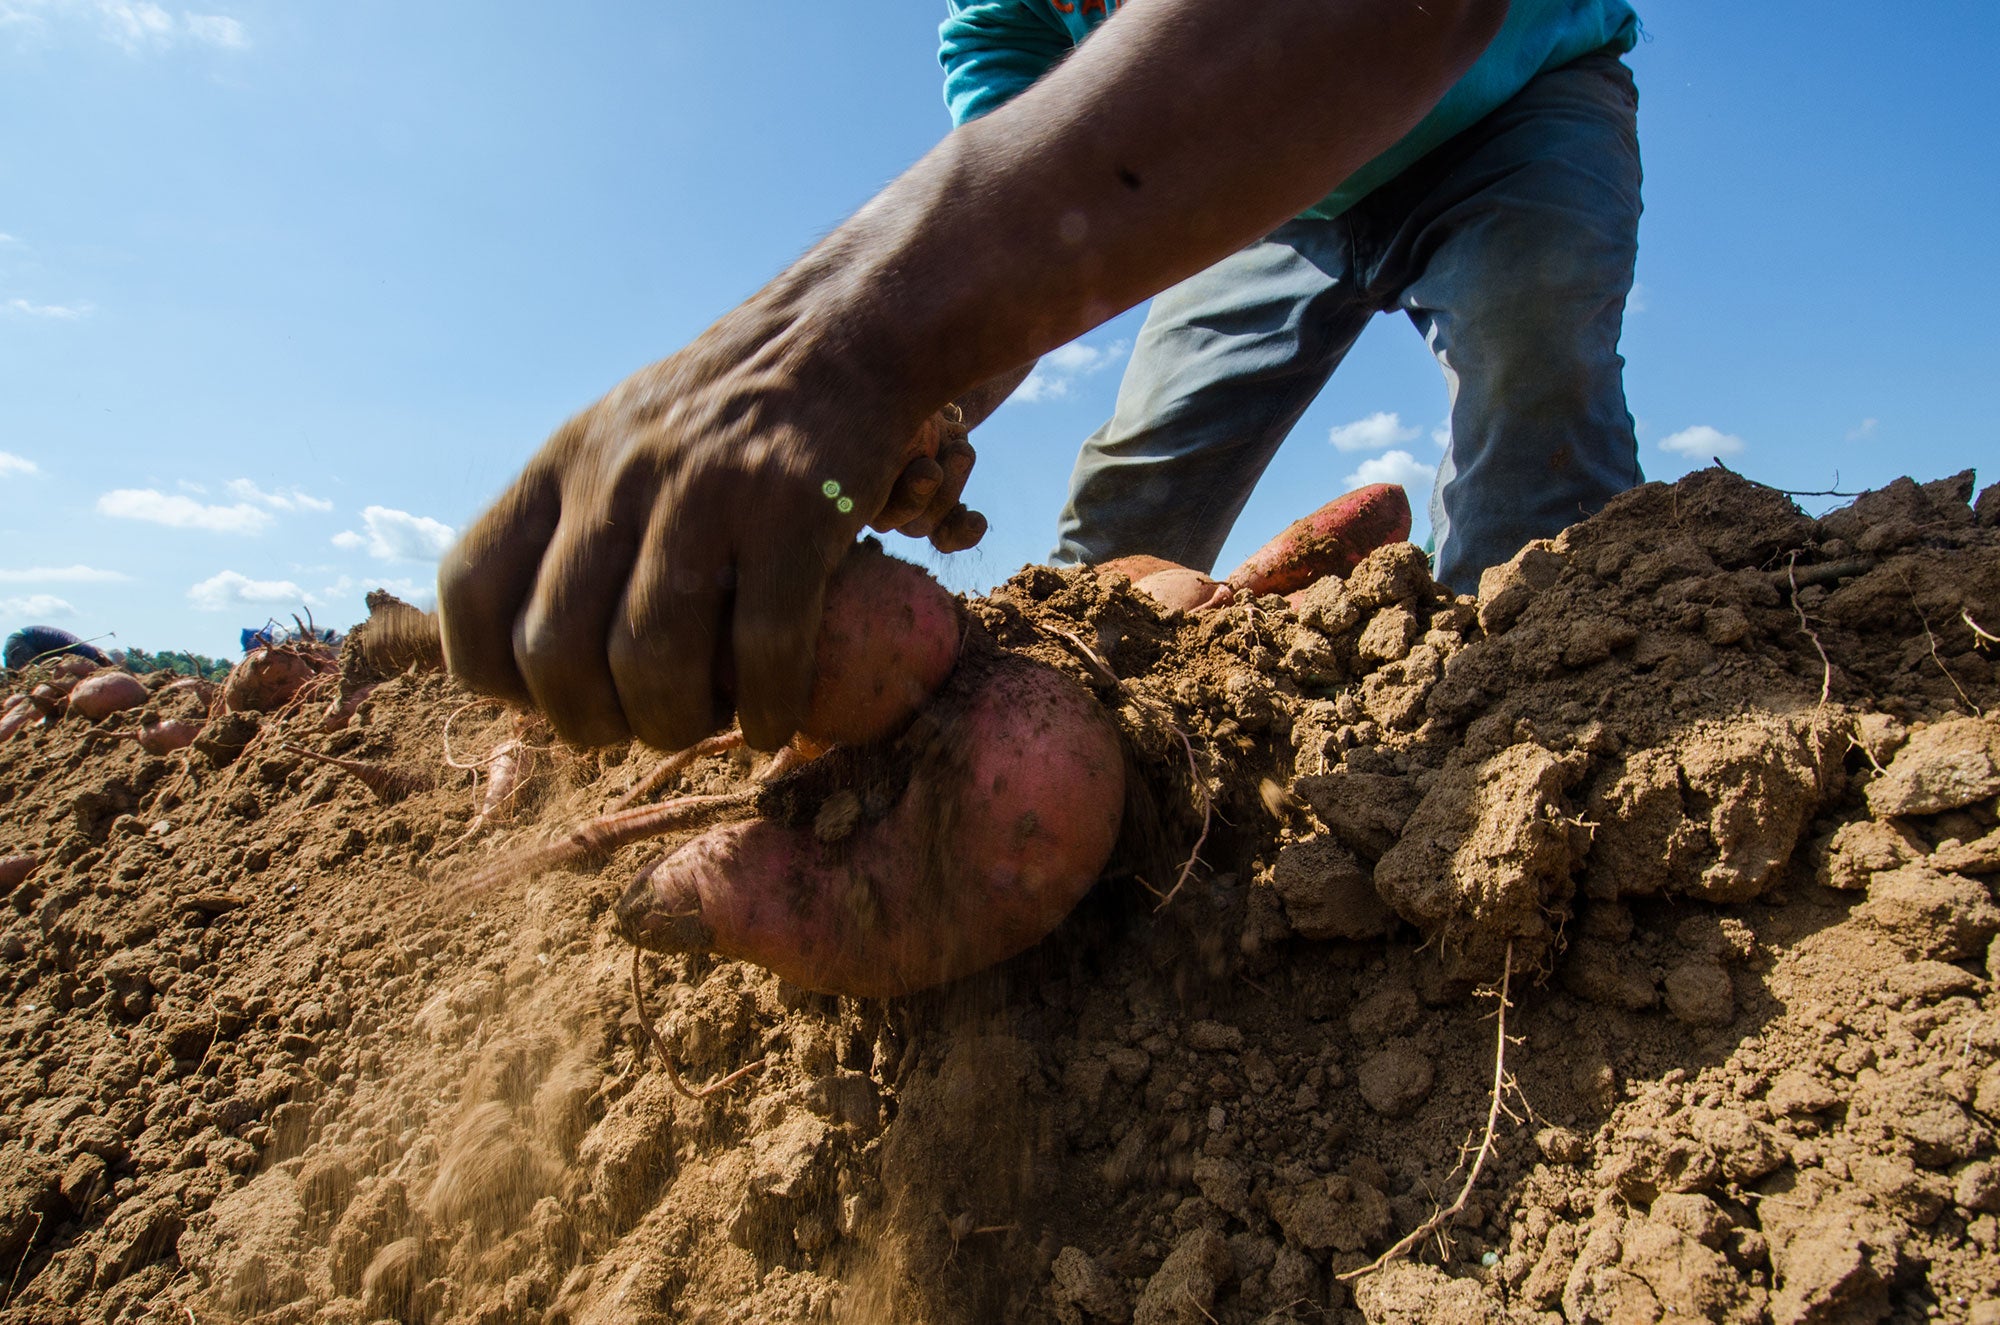 A farmworker harvests sweet potatoes from the soil in Mechanicsville, VA.